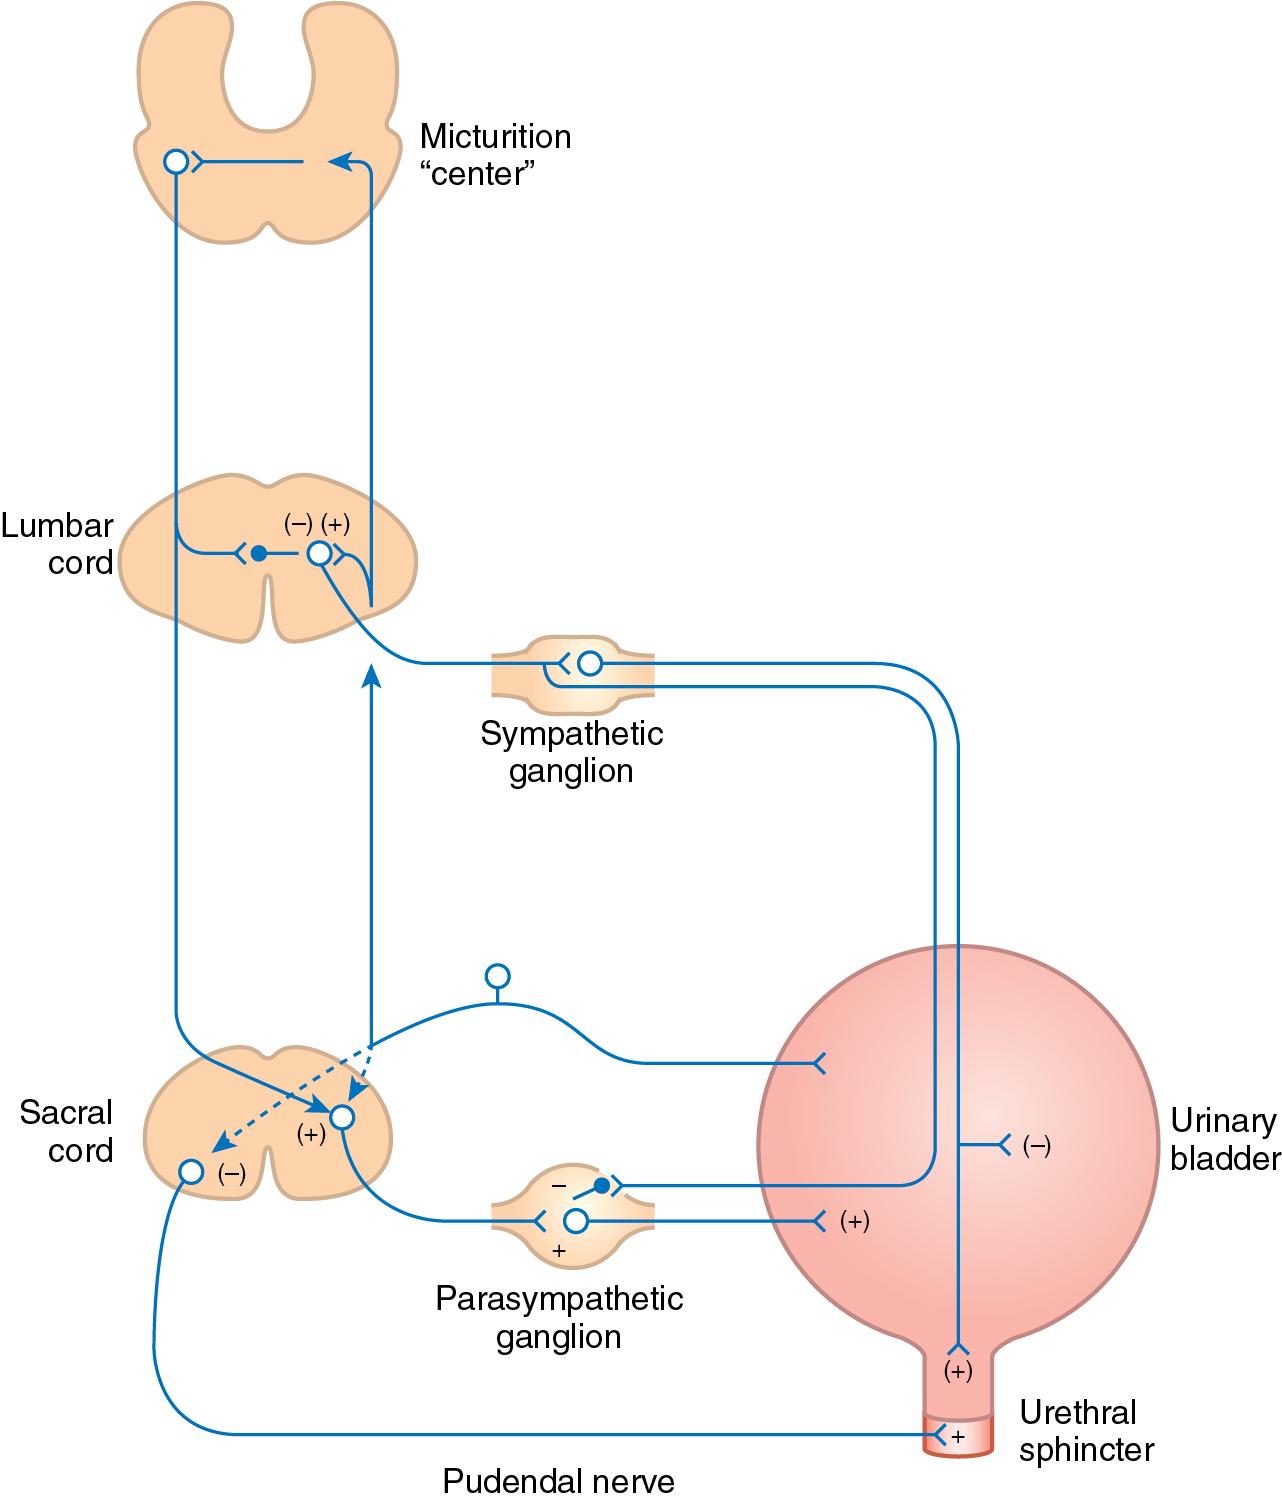 Fig. 34.1, Diagram of reflex pathways involved in micturition (according to deGroat). Plus and minus signs indicate, respectively, excitatory and inhibitory synaptic actions. The connection of the pontine micturition center to the cerebral cortex and other suprapontine areas is not pictured.